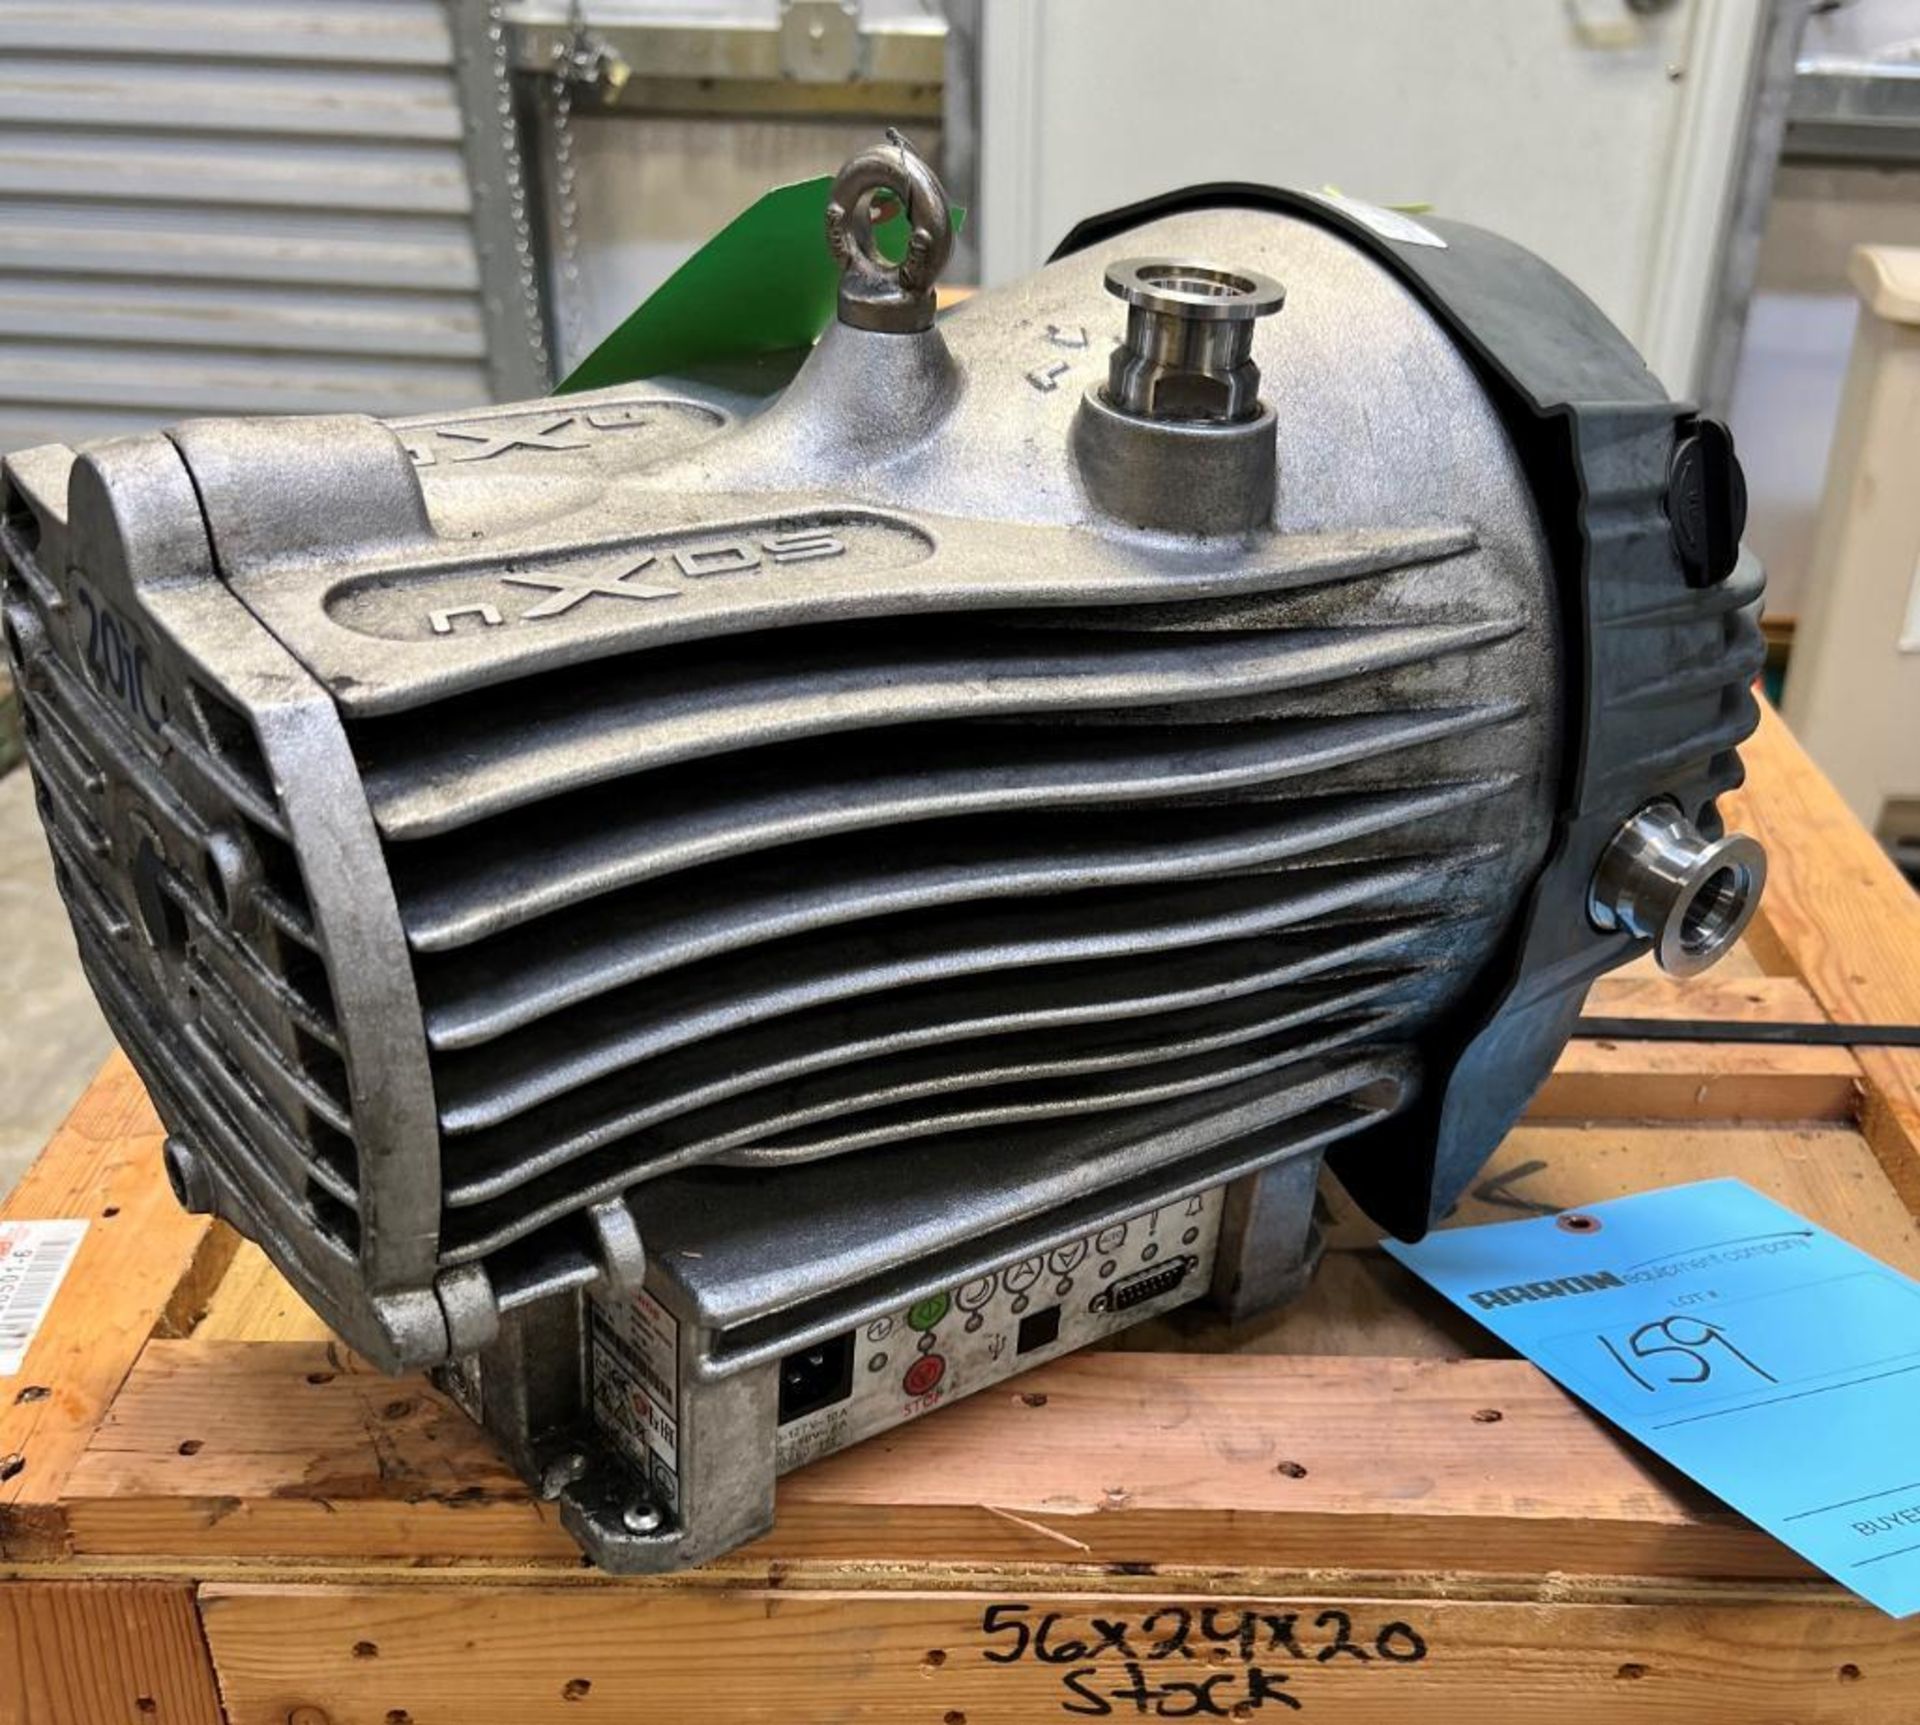 Edward Chemical Resistant Scroll Vacuum Pump, Model nXDS20iC, Serial# 190410325.